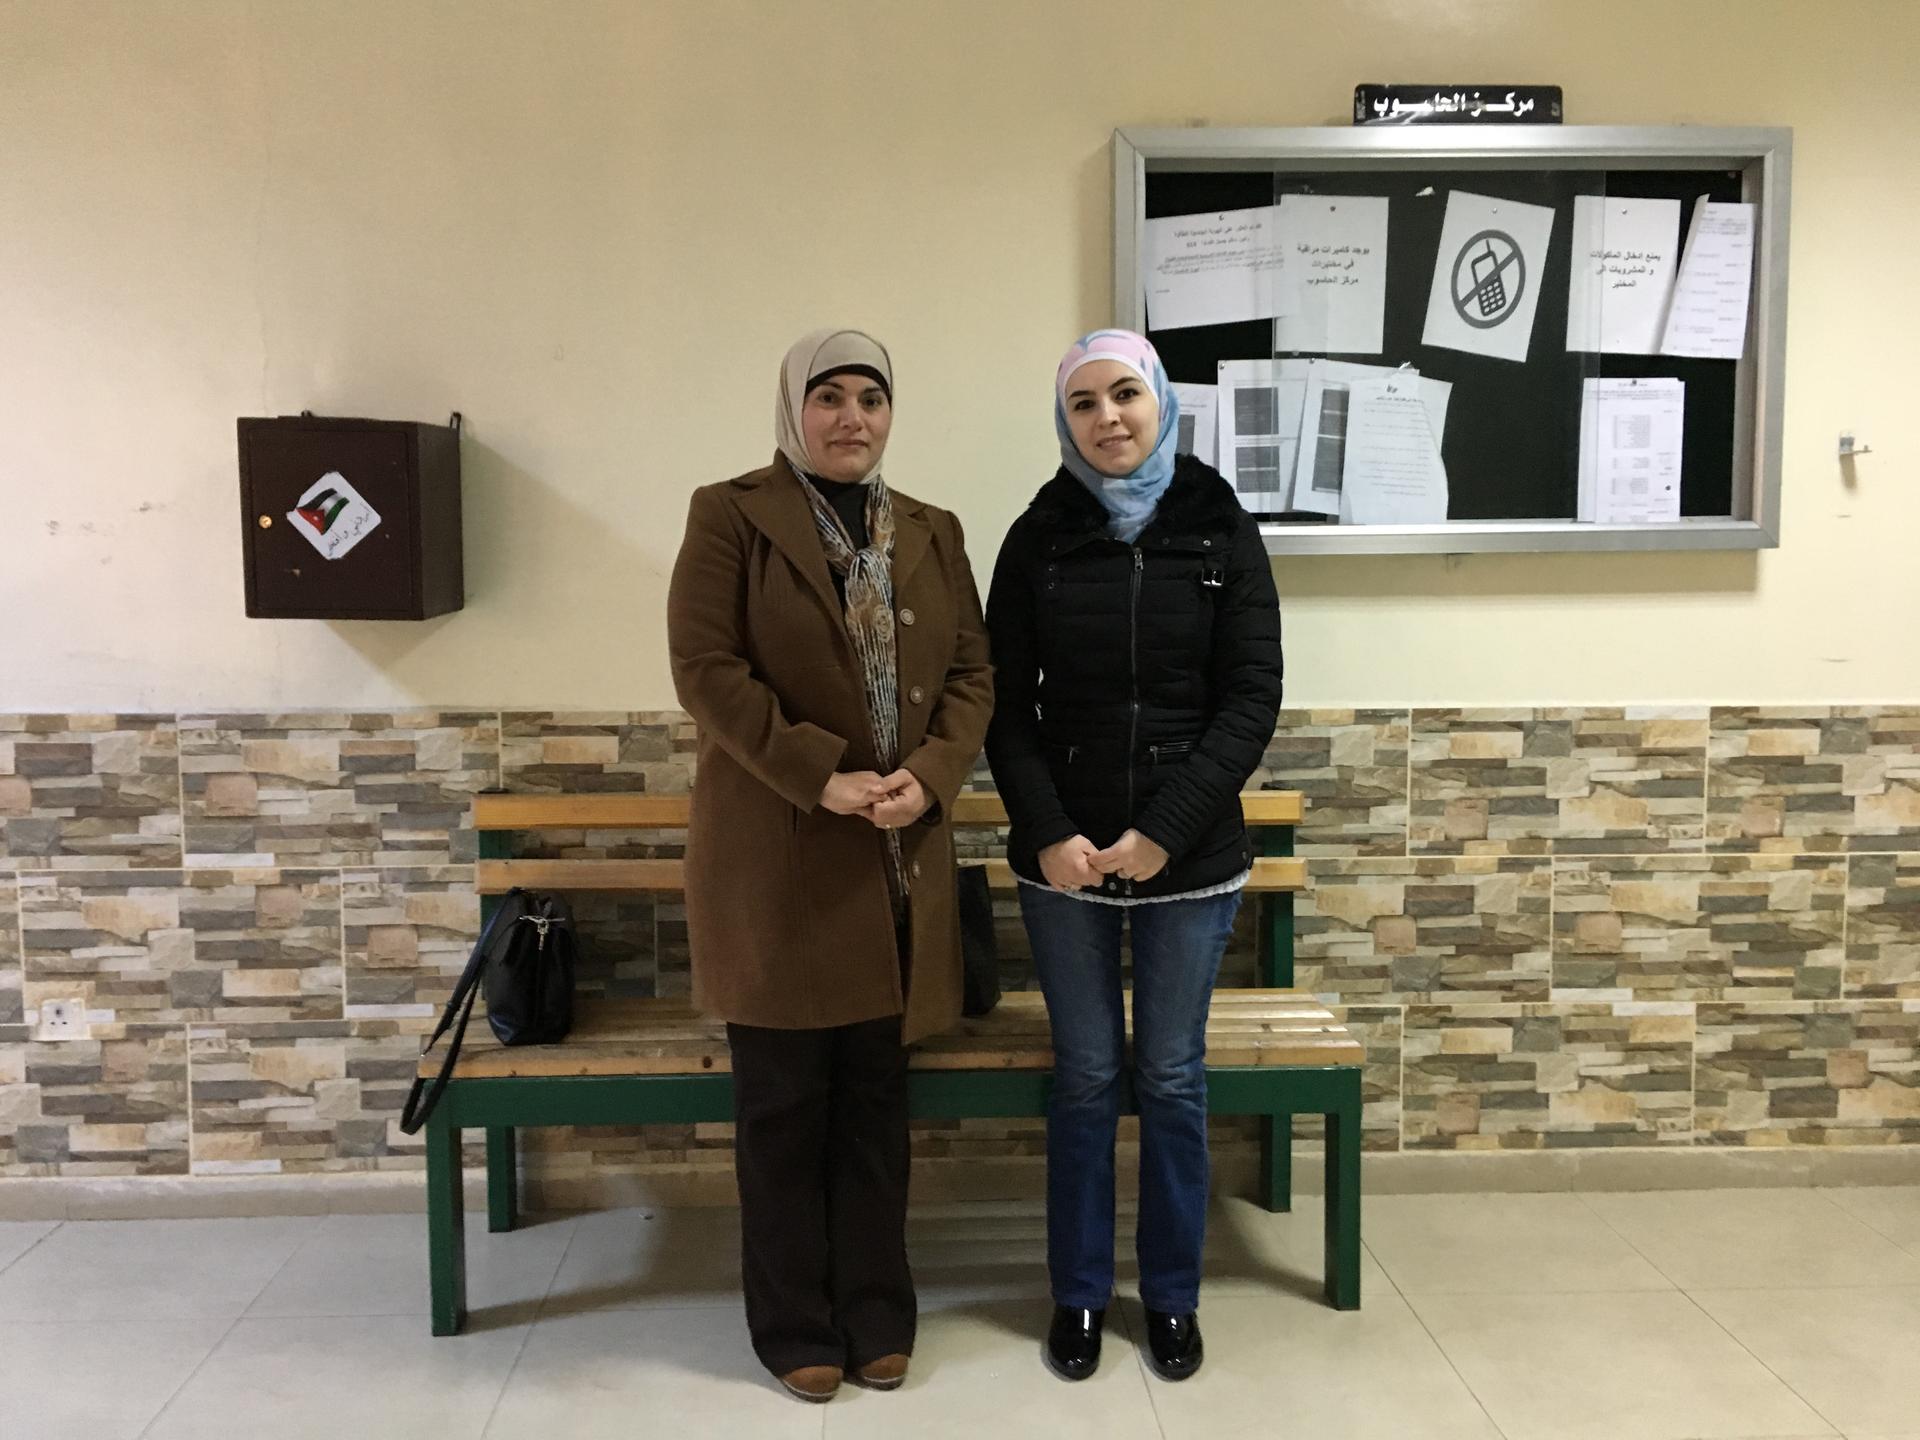 Graduate students Maram Ziead and Haya Ali at The University of Jordan talk about the challenges of finding a job in Jordan.